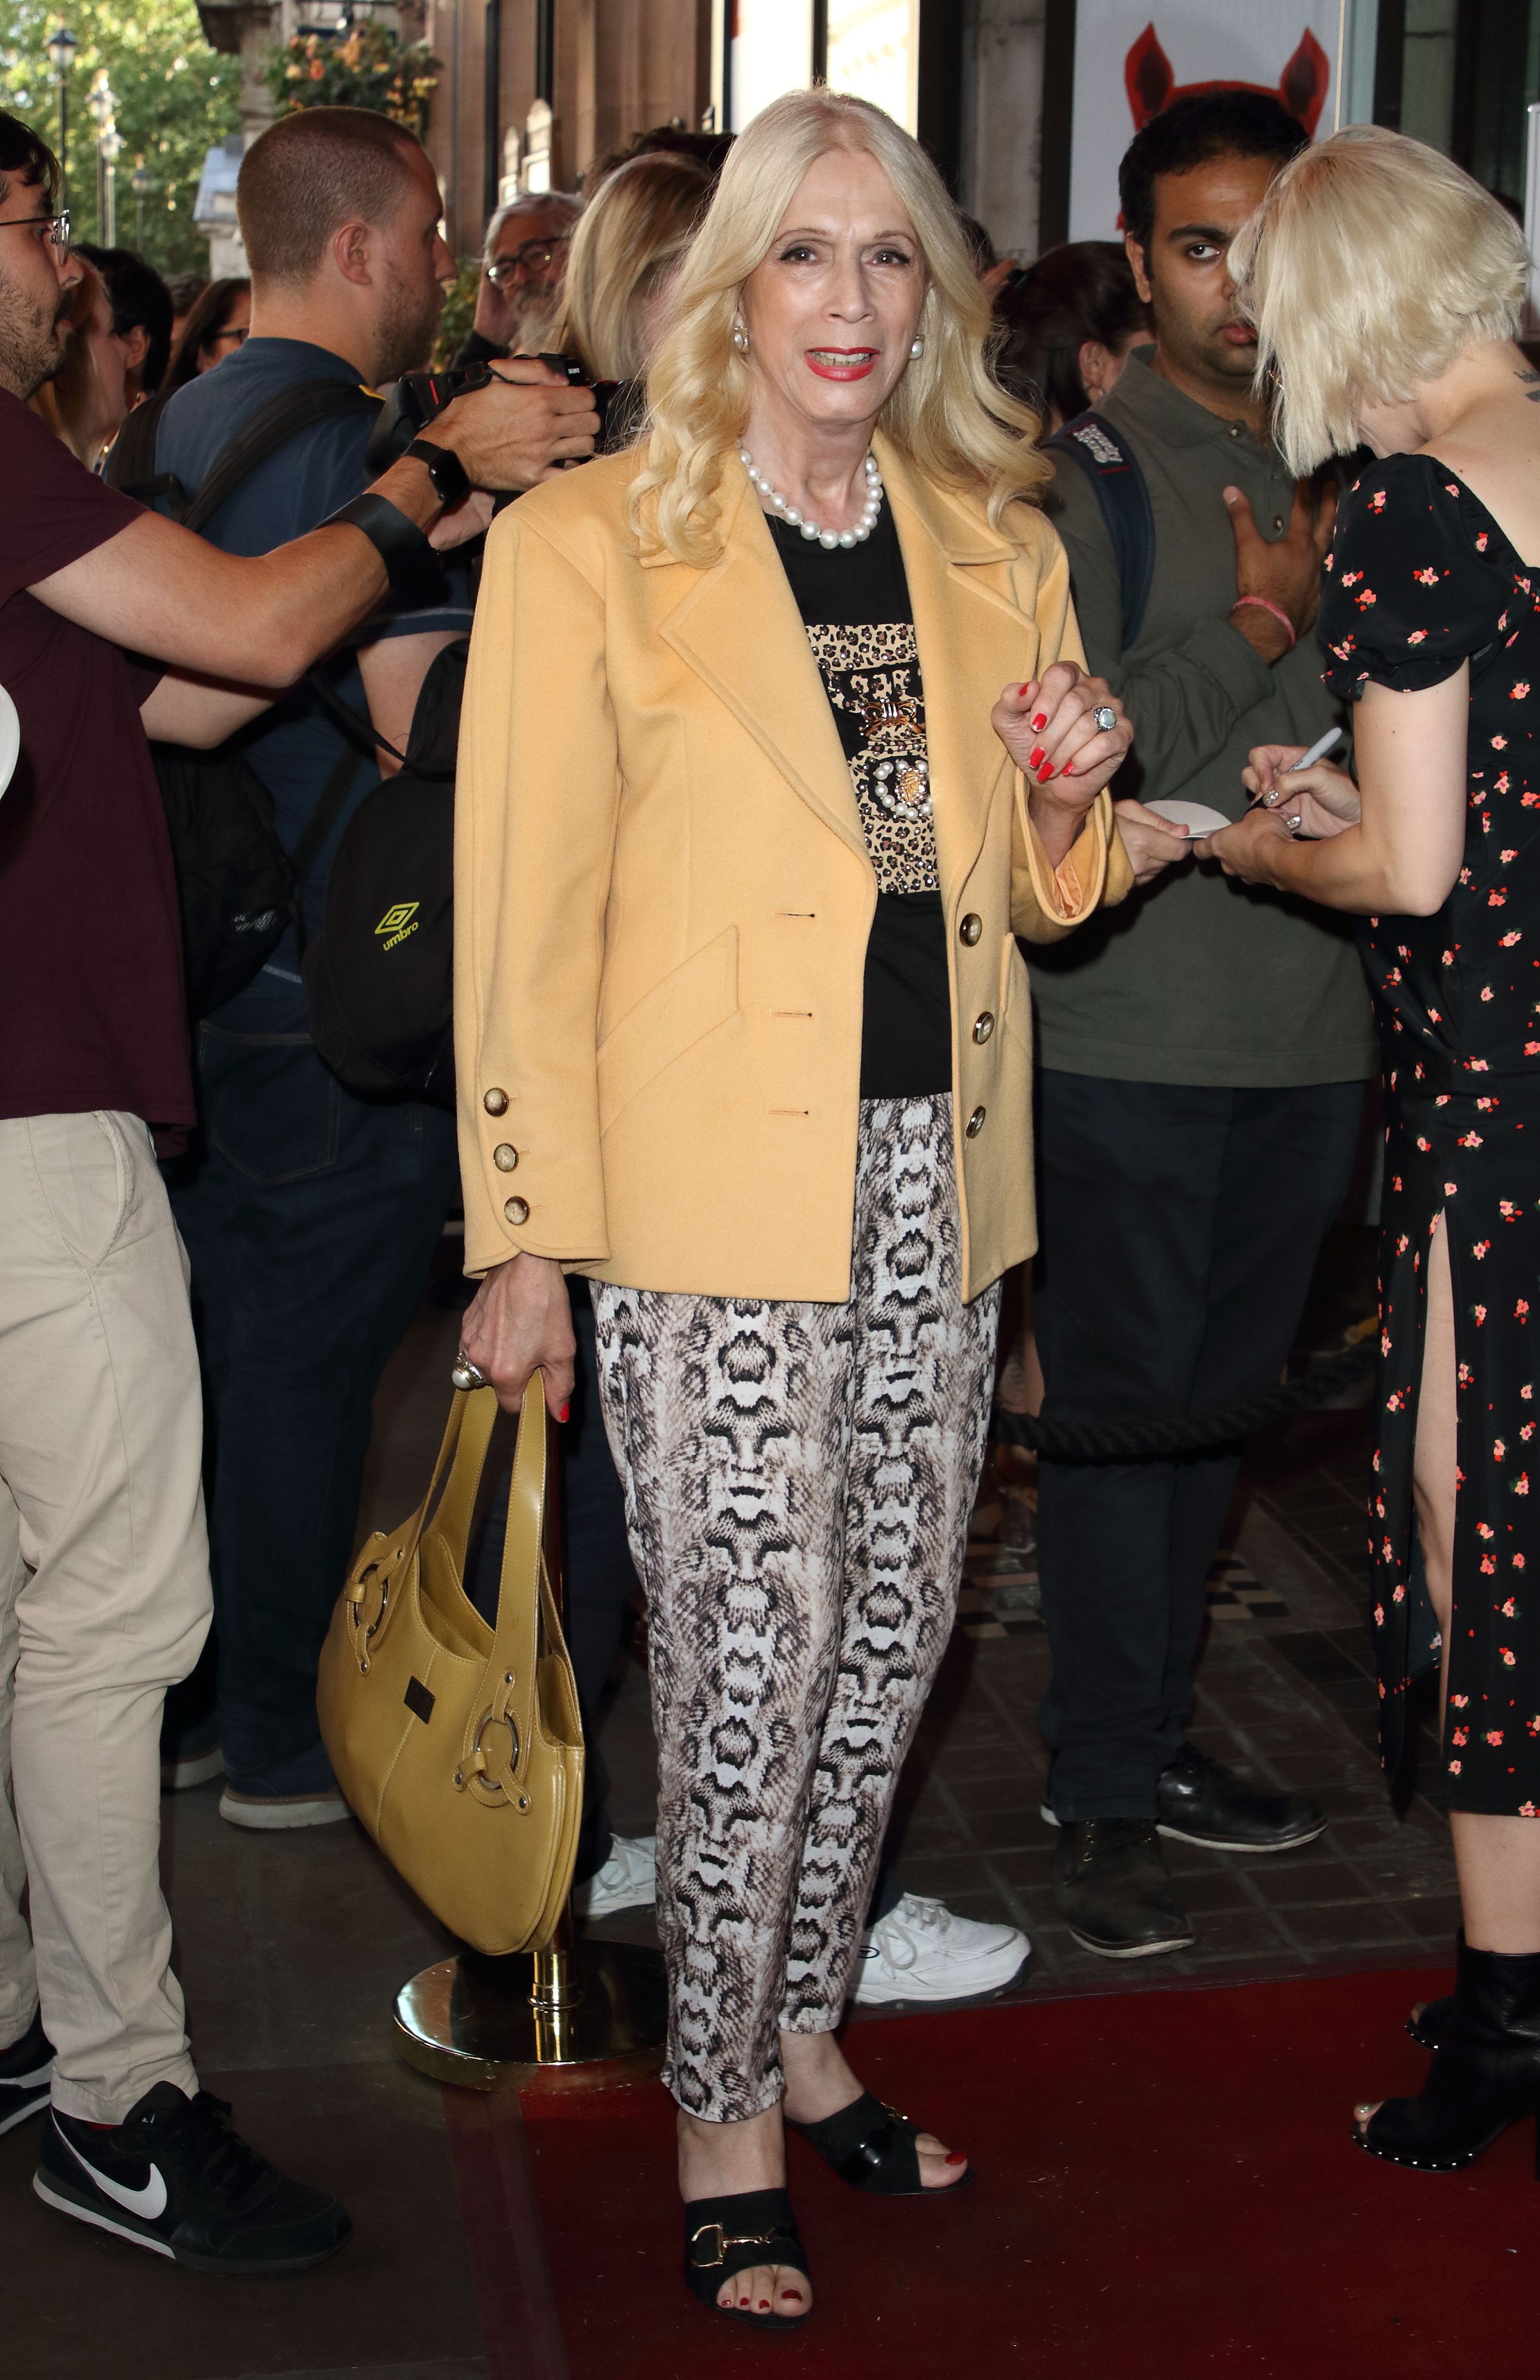 Lady Colin Campbell at the Equus Press Night at the Trafalgar Studios on July 15, 2019 | Photo: Getty Images